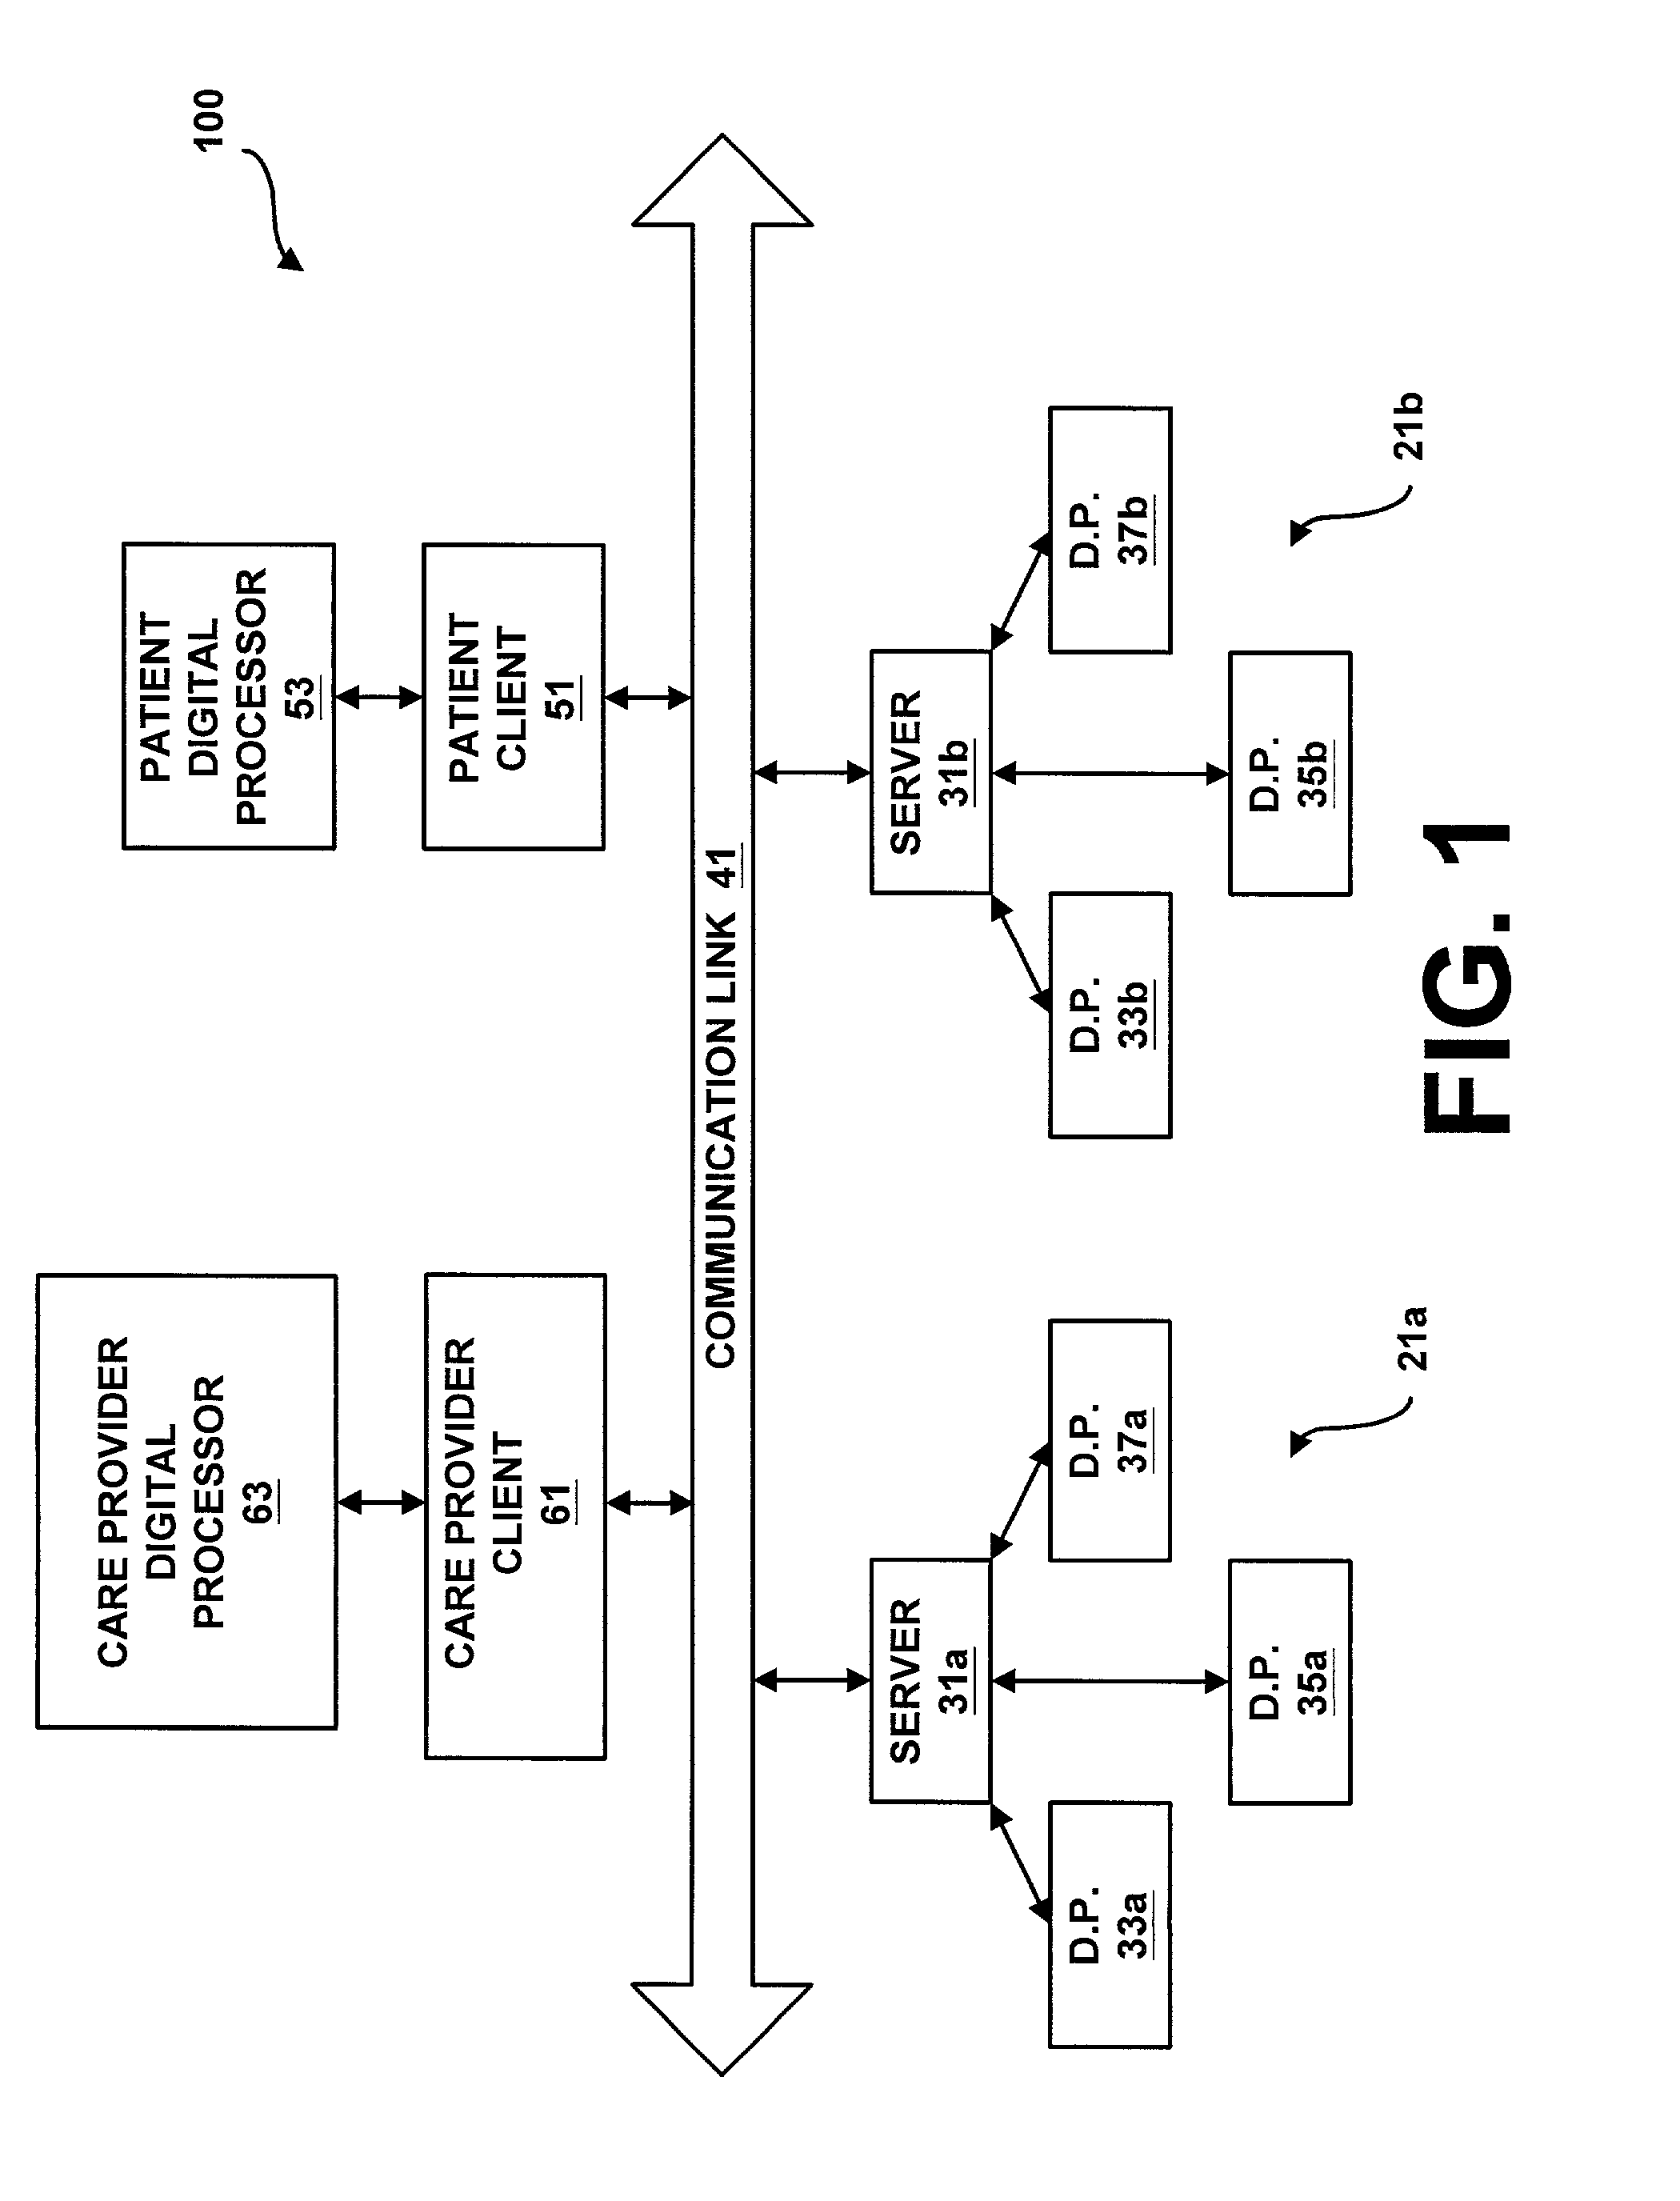 System and method for providing patient care management